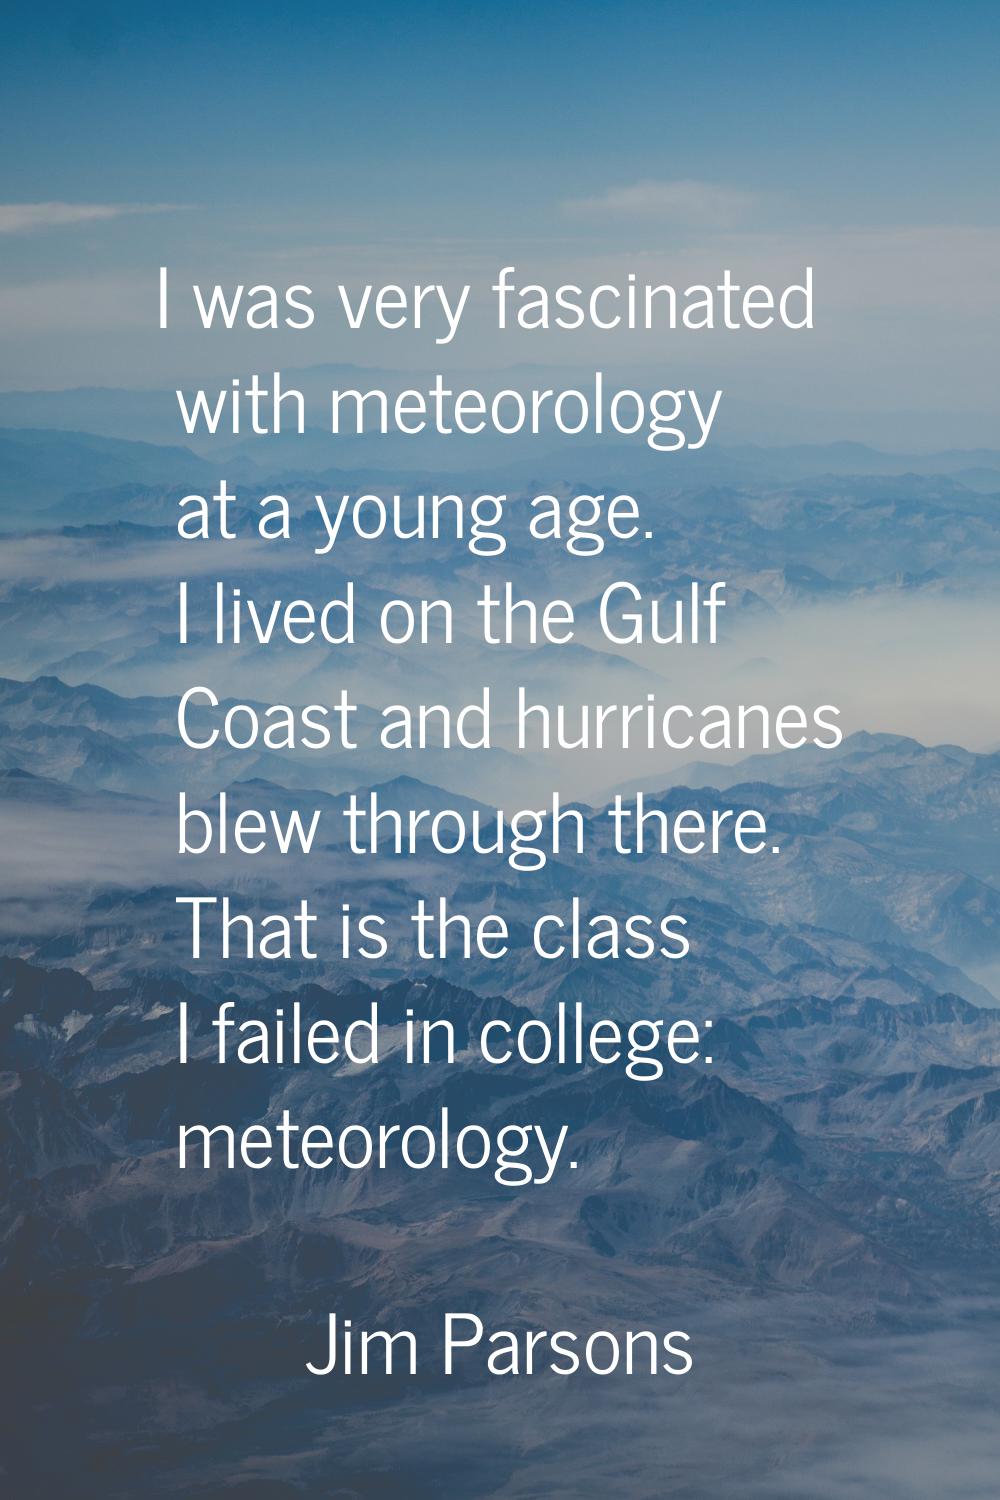 I was very fascinated with meteorology at a young age. I lived on the Gulf Coast and hurricanes ble